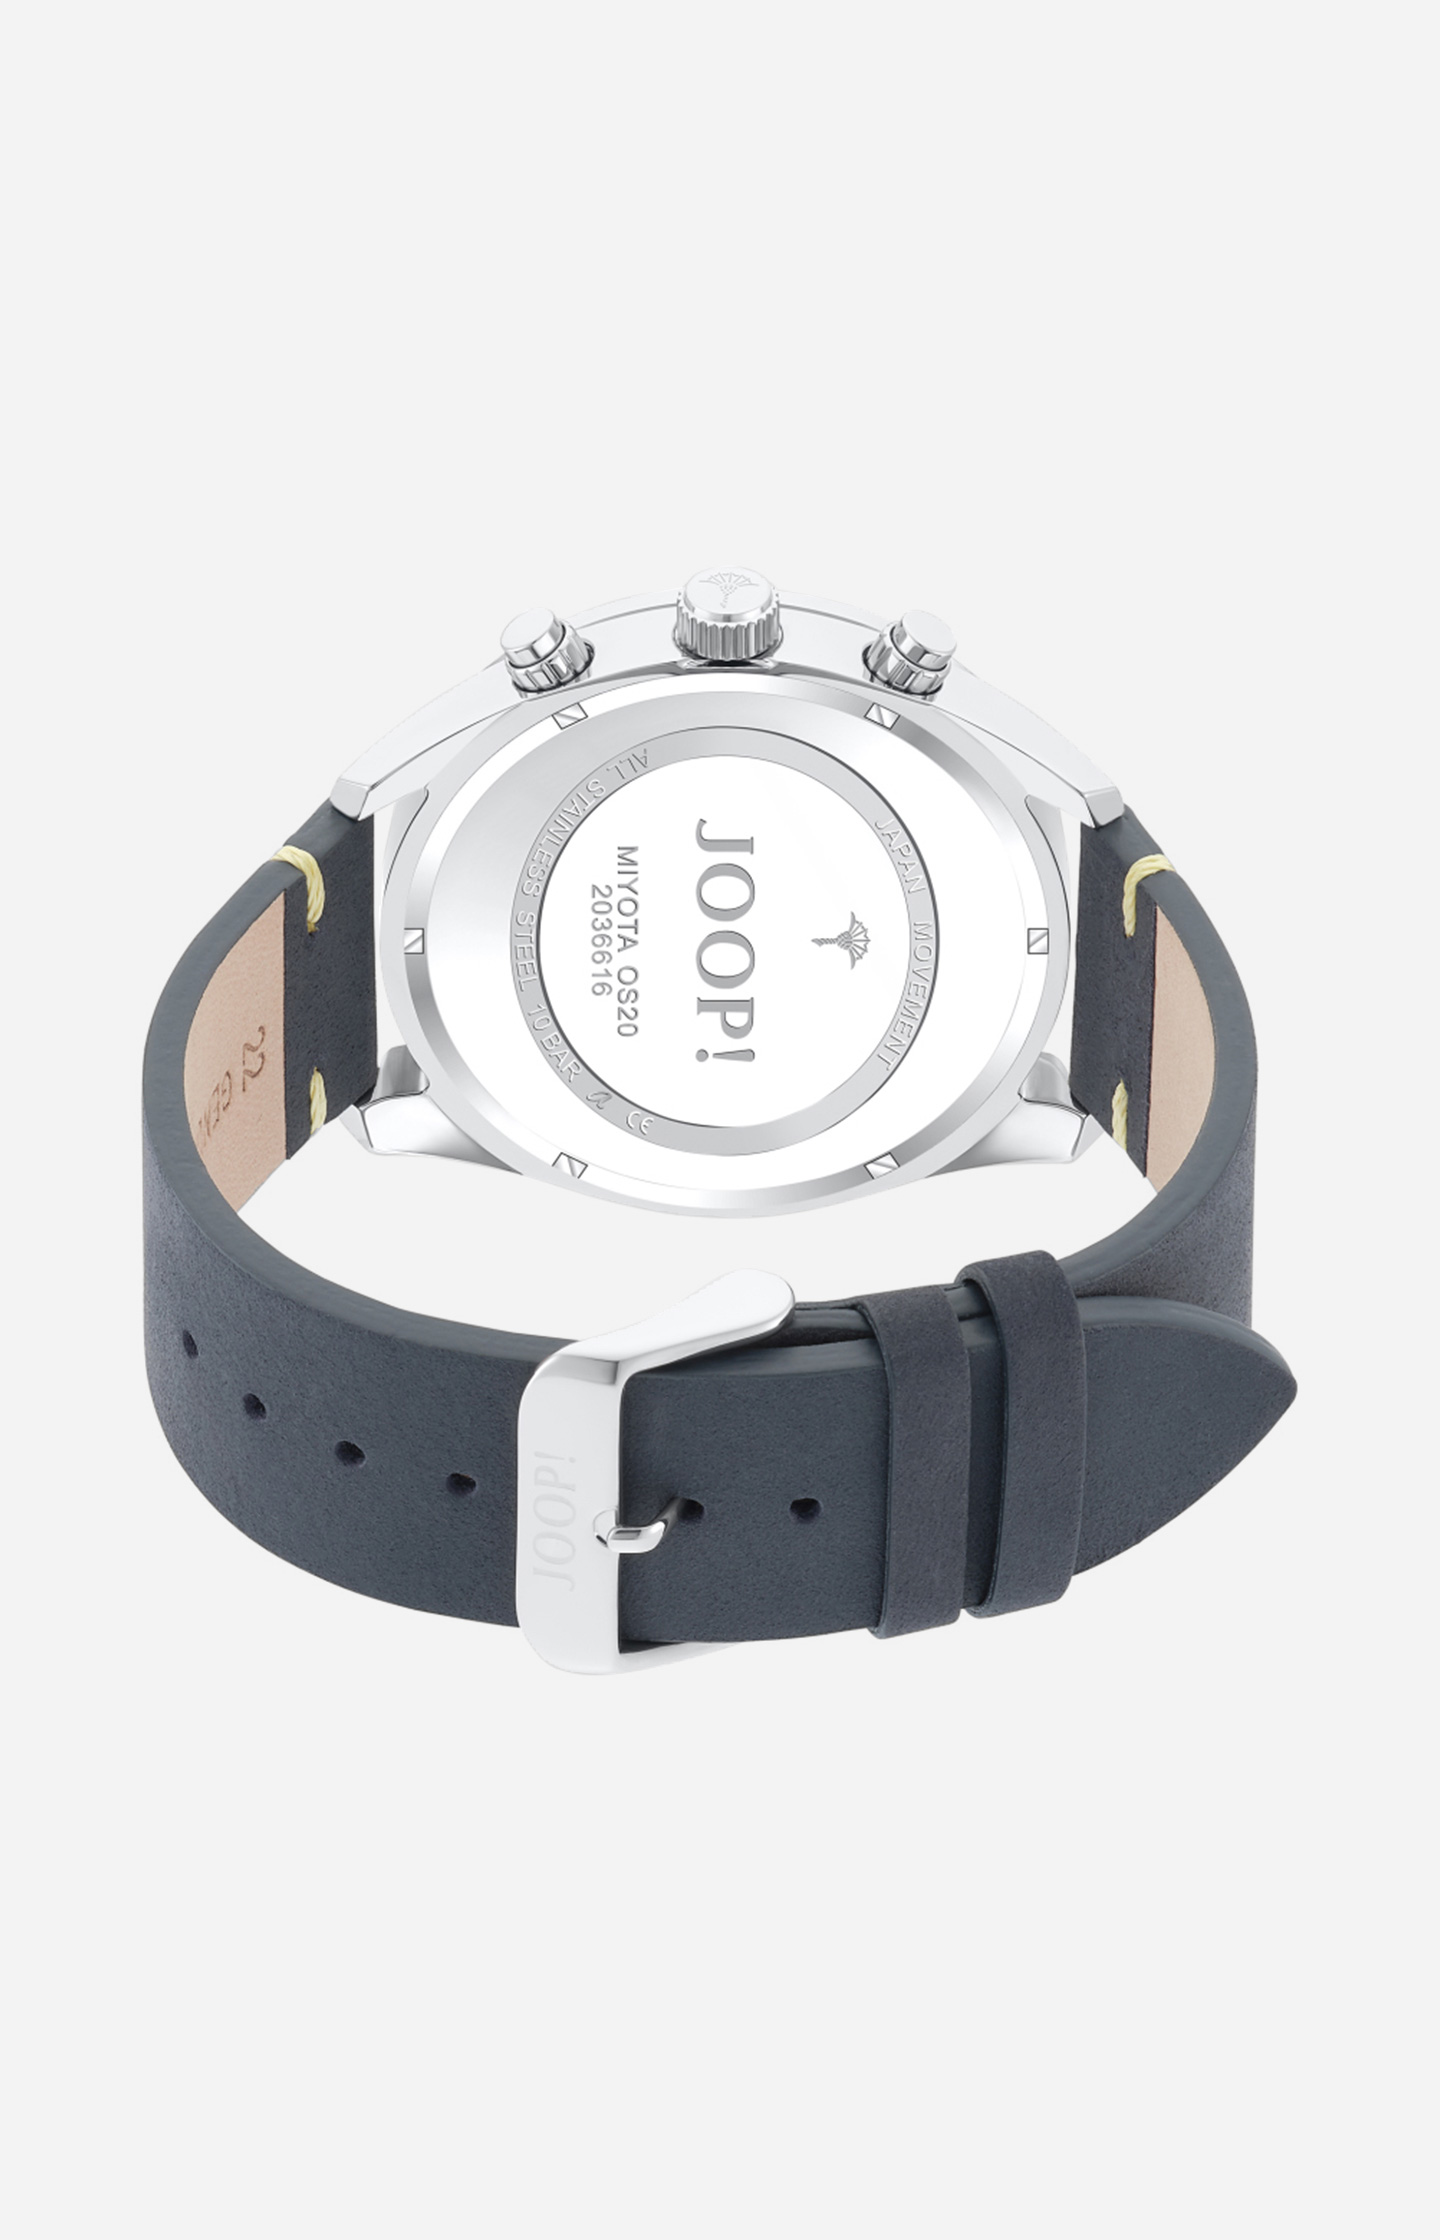 Joop - Buy and sell watches at TrustedWatch - TrustedWatch